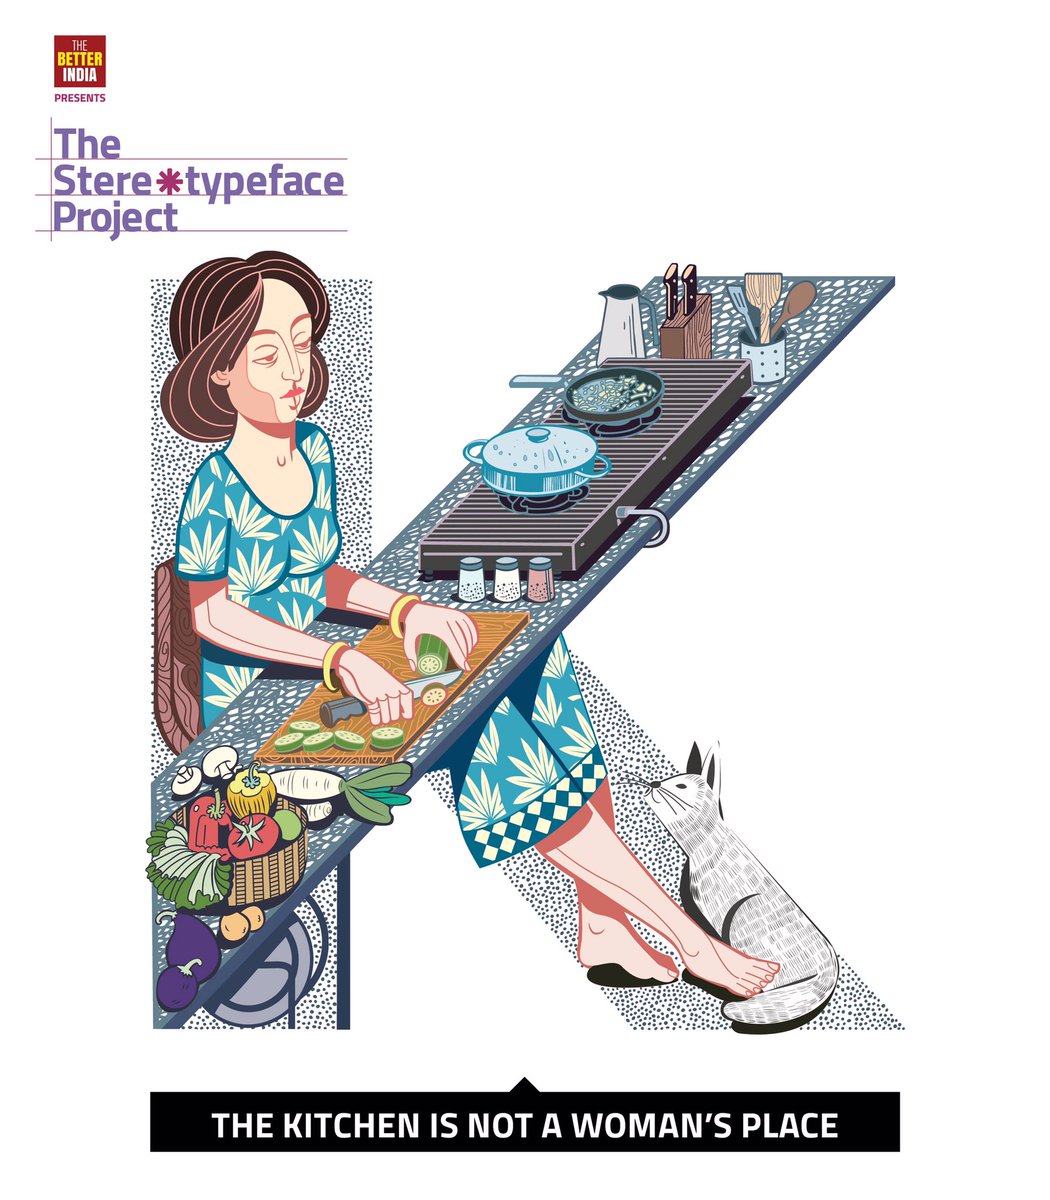 #stereotypes 
I am sure we all know these.
Check the brilliant initiative by @thebetterindia highlighting 26 stereotypes explained through each letter.The one I feel strongly about - women are meant to be in the kitchen. 
#EndTheStereotype #WomensRights 
stereotypes.in